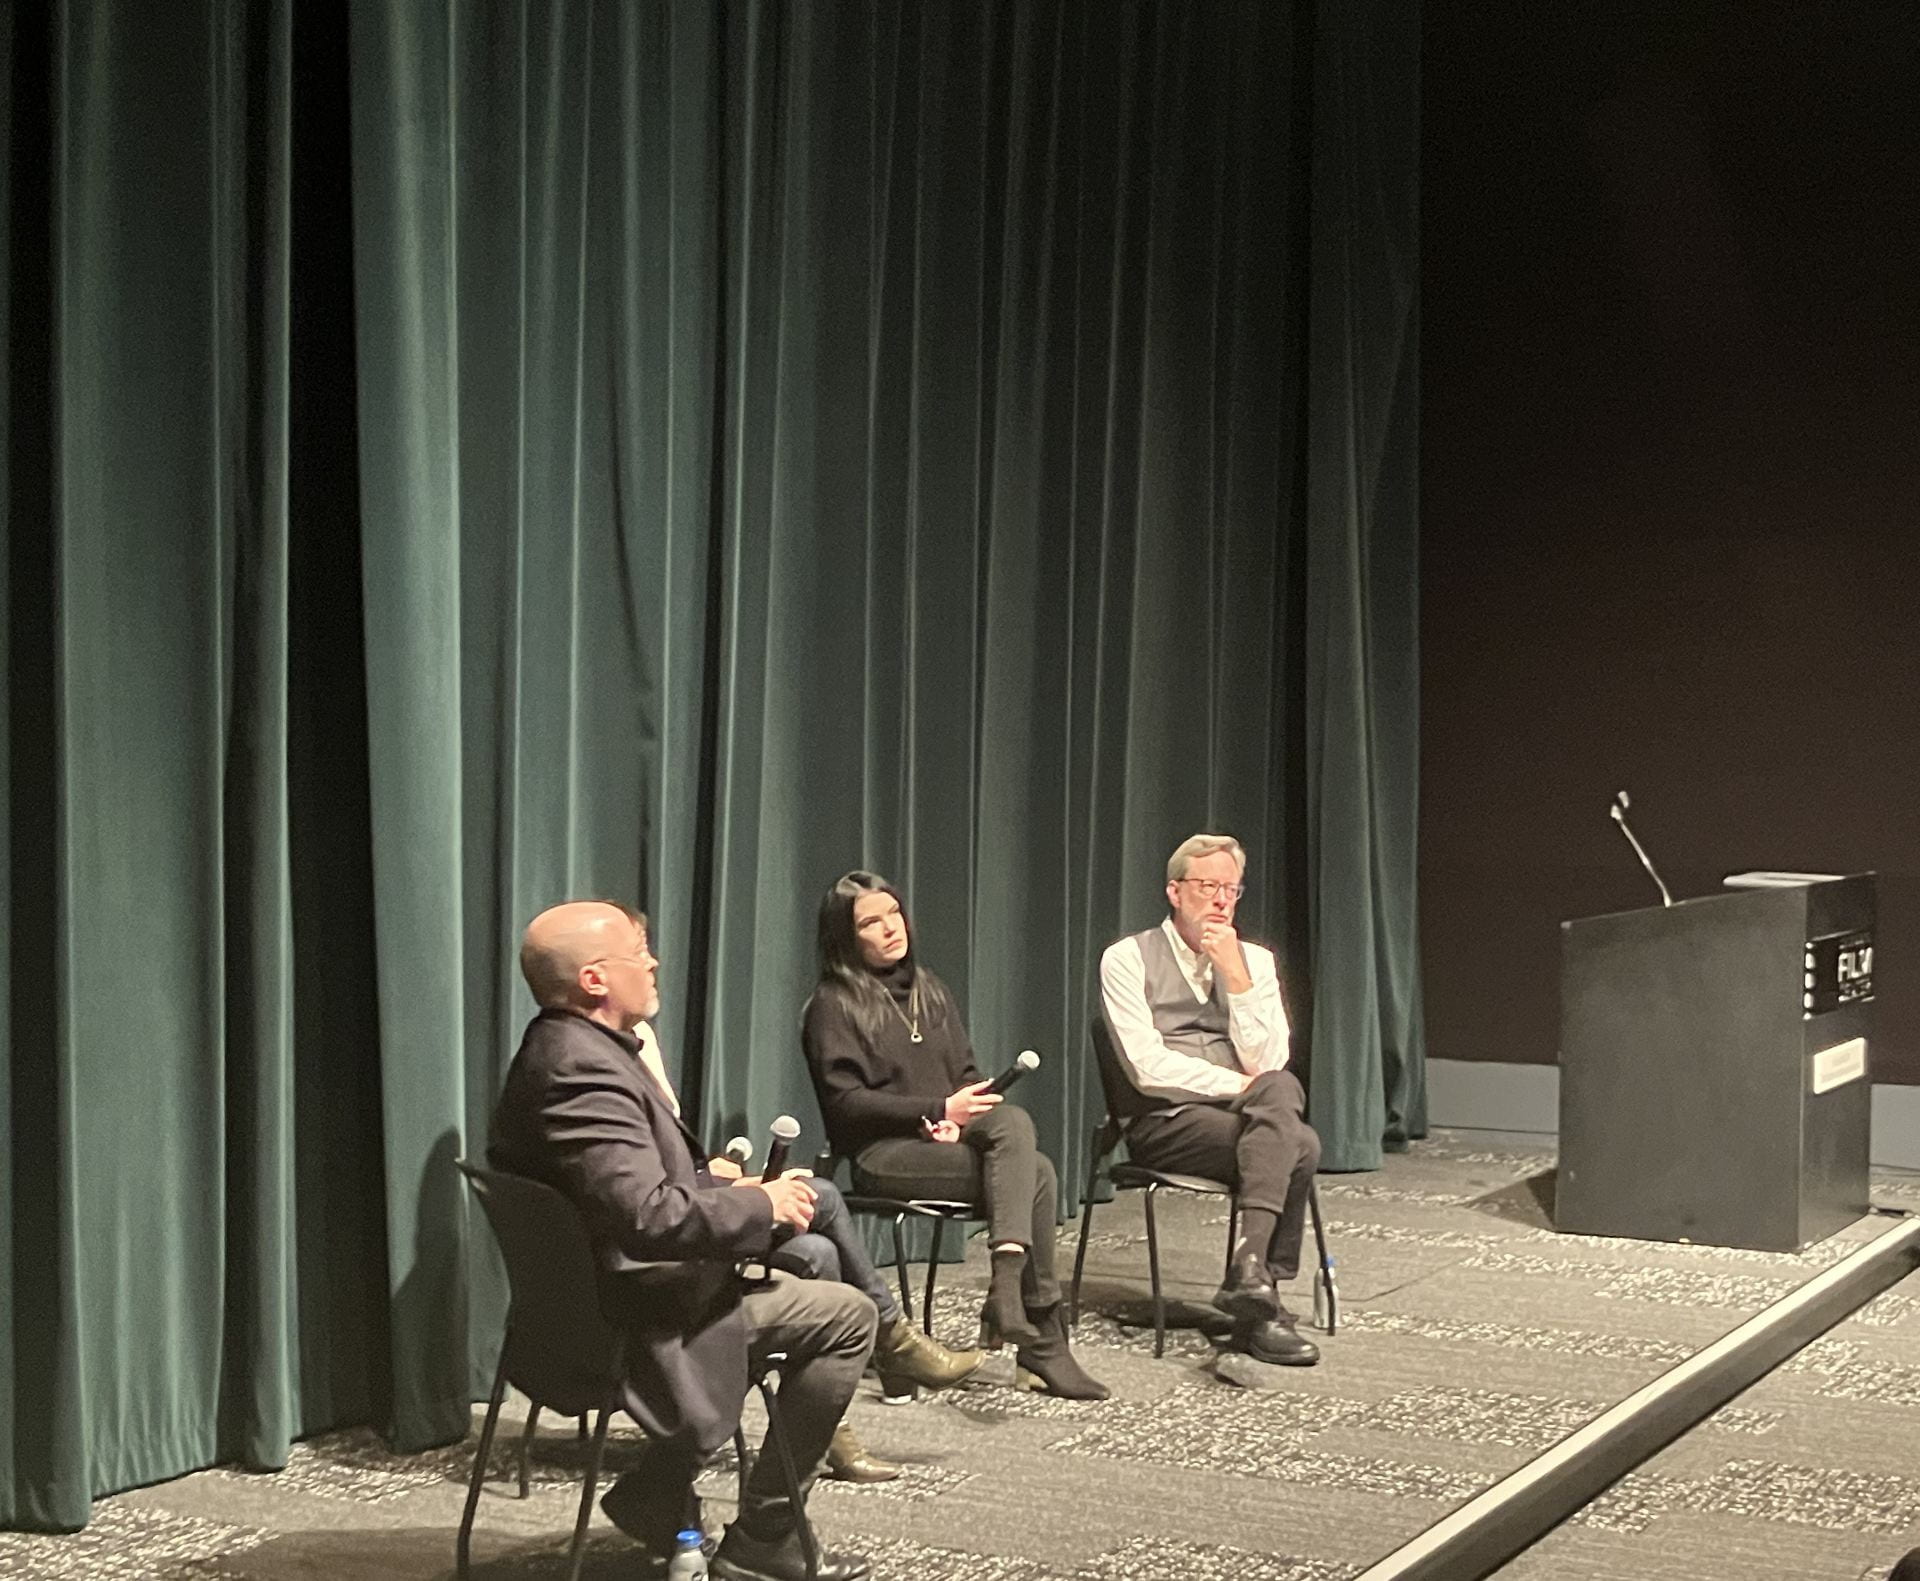 A panel of sitting people in front of a theatre curtain. They are taking questions from the audience.